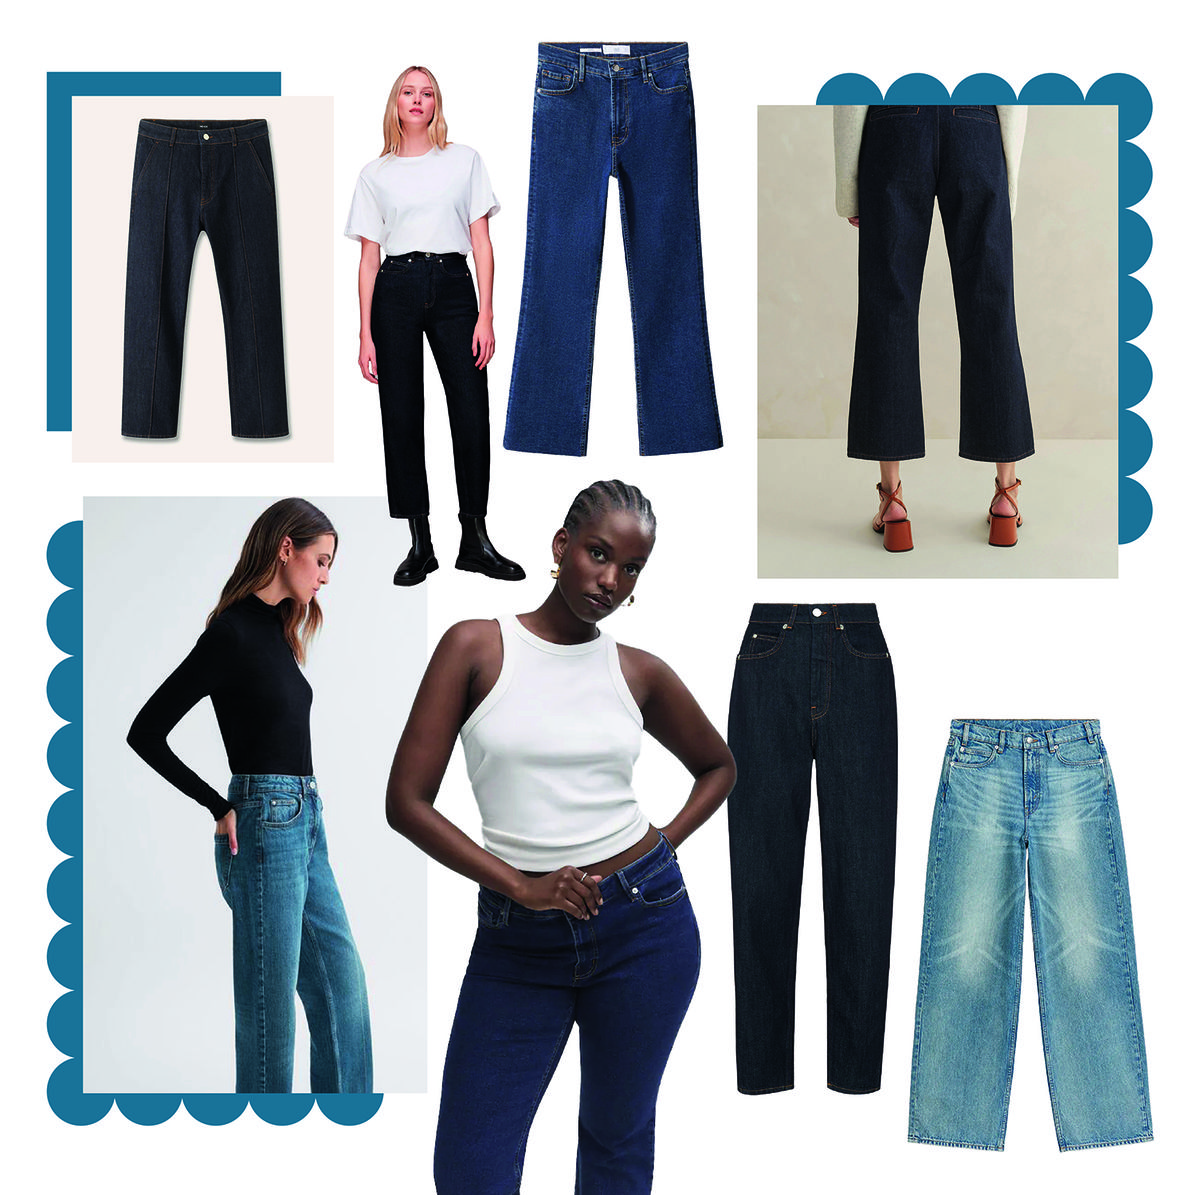 Women's Top Rated Jeans, Best Jeans For Women